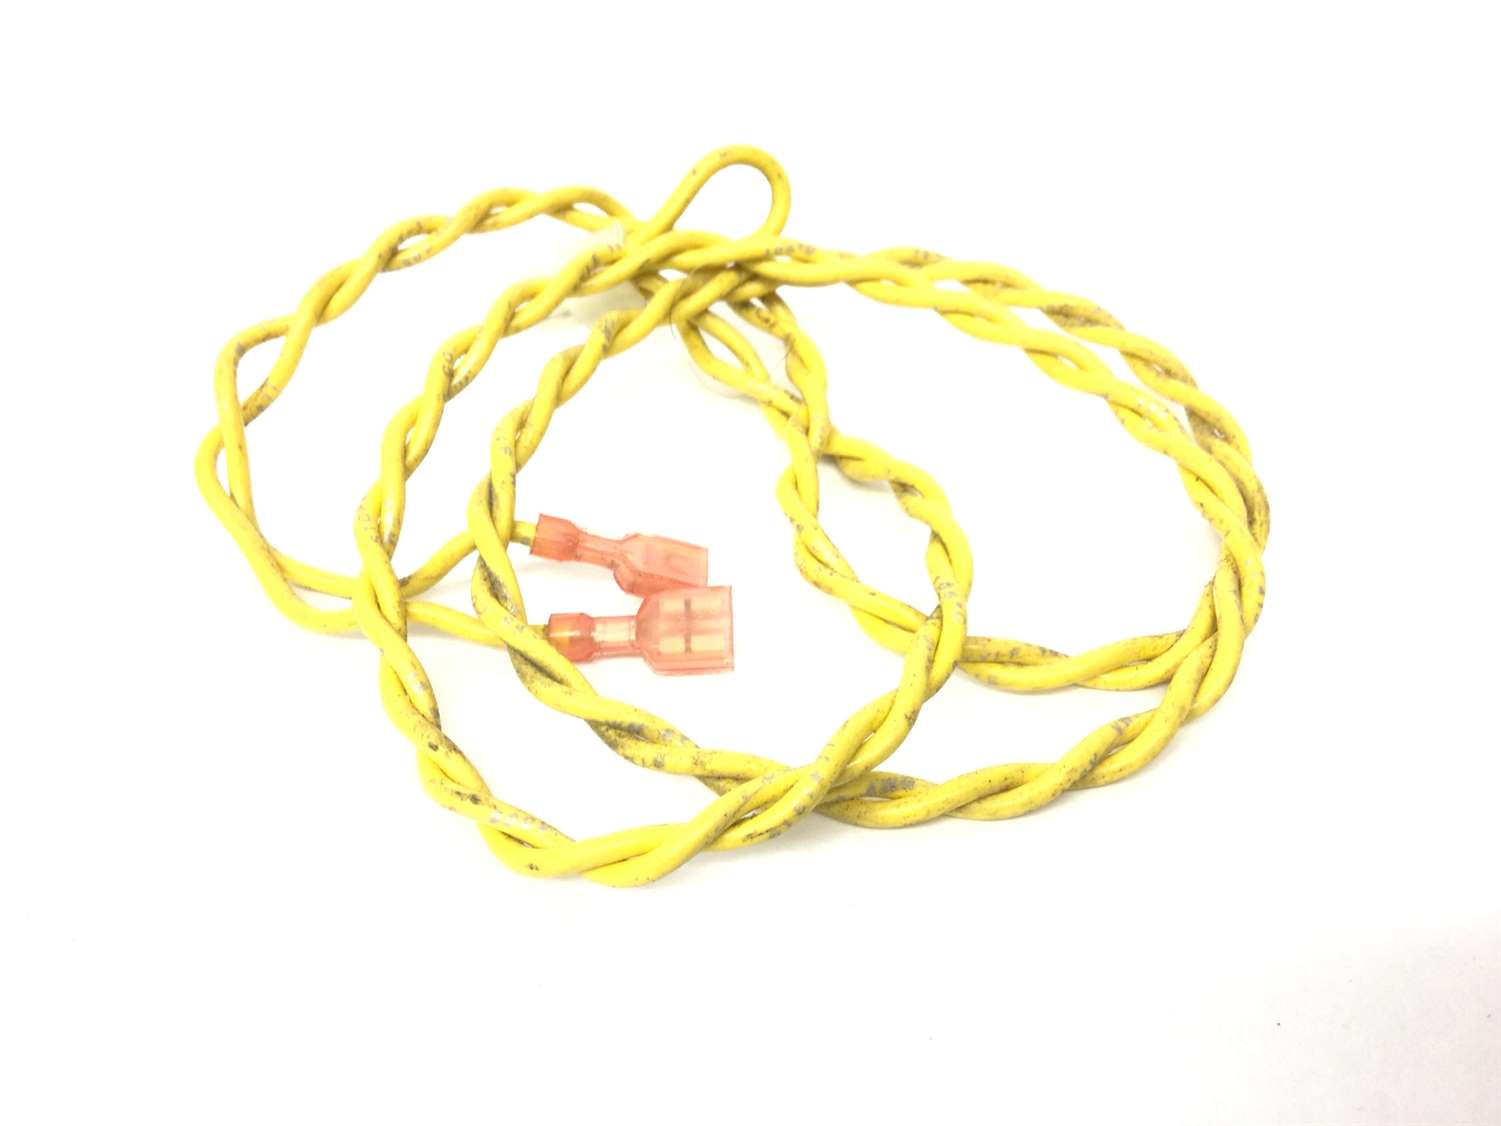 Wire Harness Cable twisted yellow with quick connects (Used)